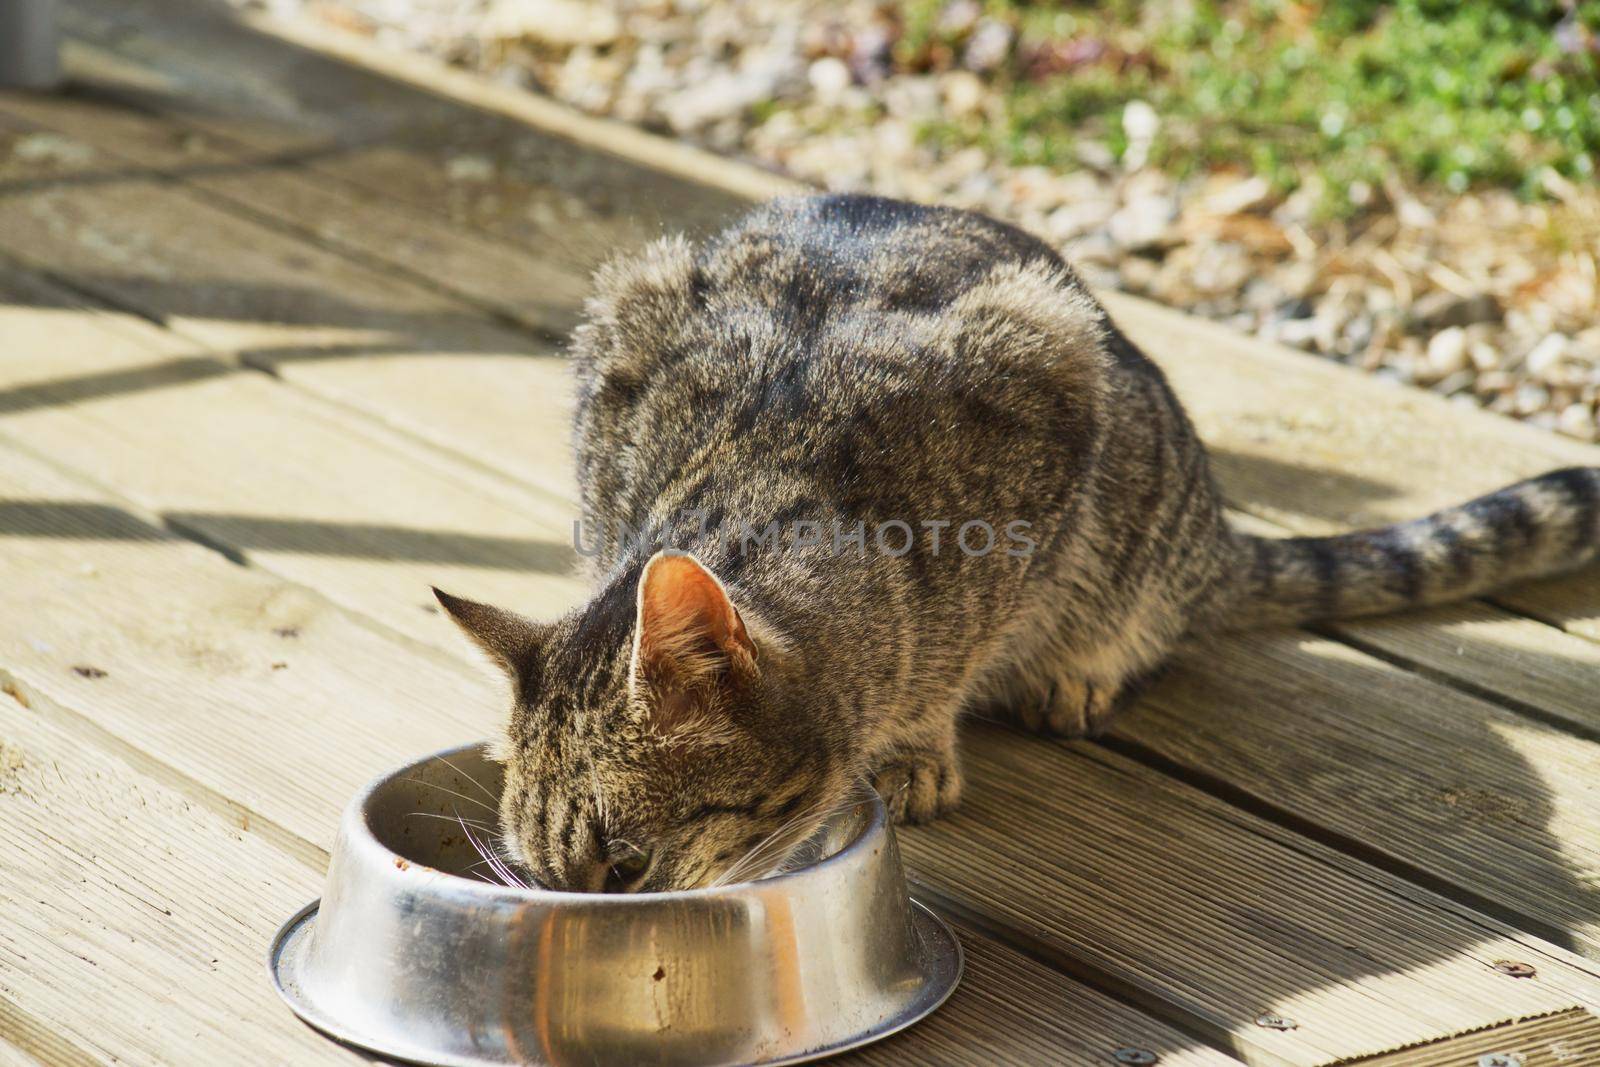 domestic cat eating from a bowl